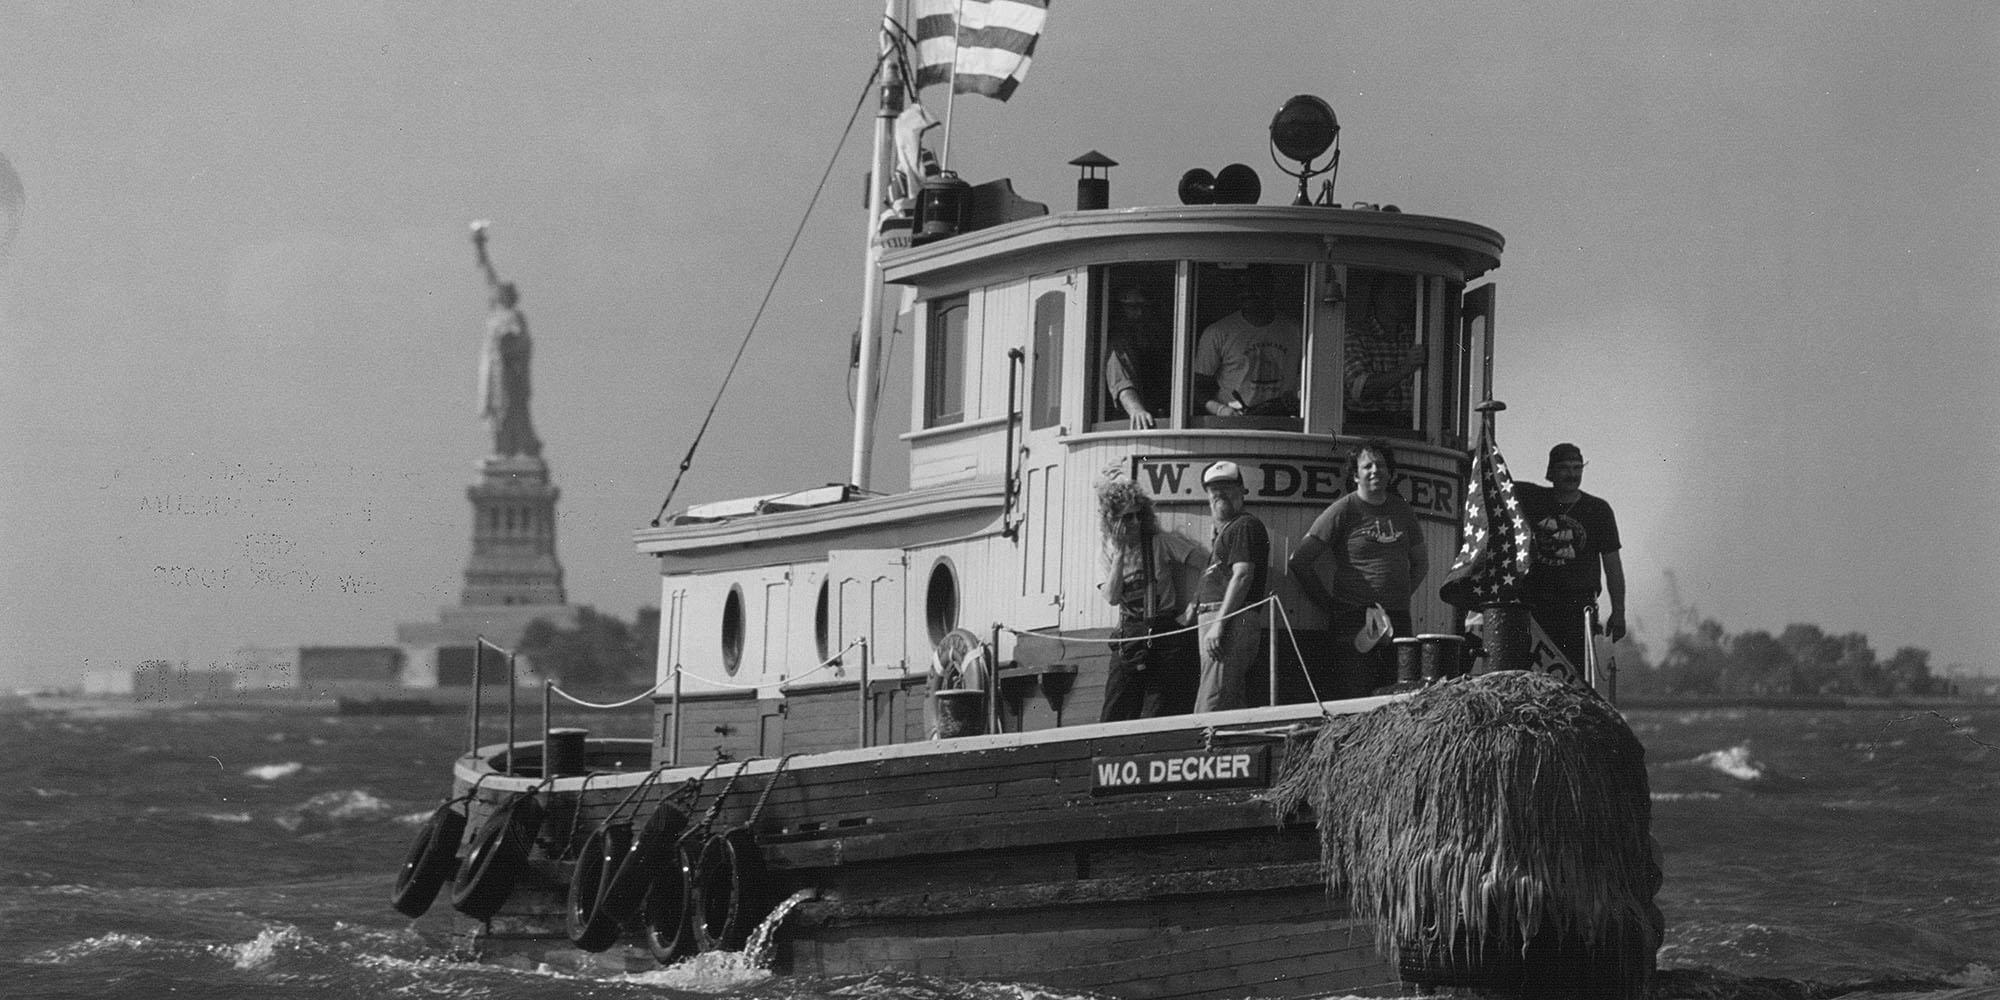 About the 1930 Tugboat W.O. Decker